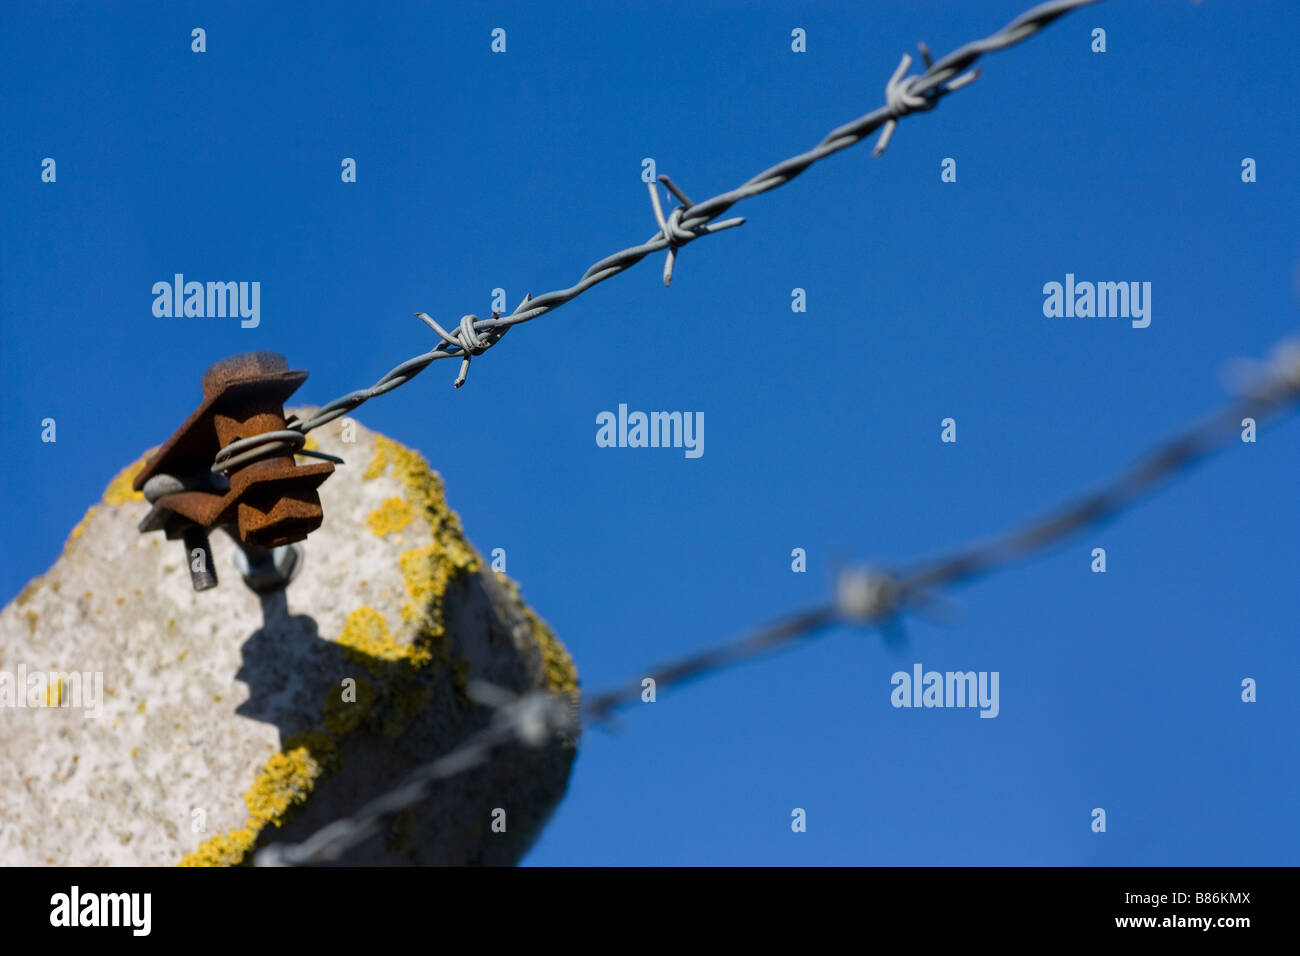 Tip of pre cast concrete security fence post with rusty barbed wire tensioner and 2 strips of barbed wire against blue sky Stock Photo